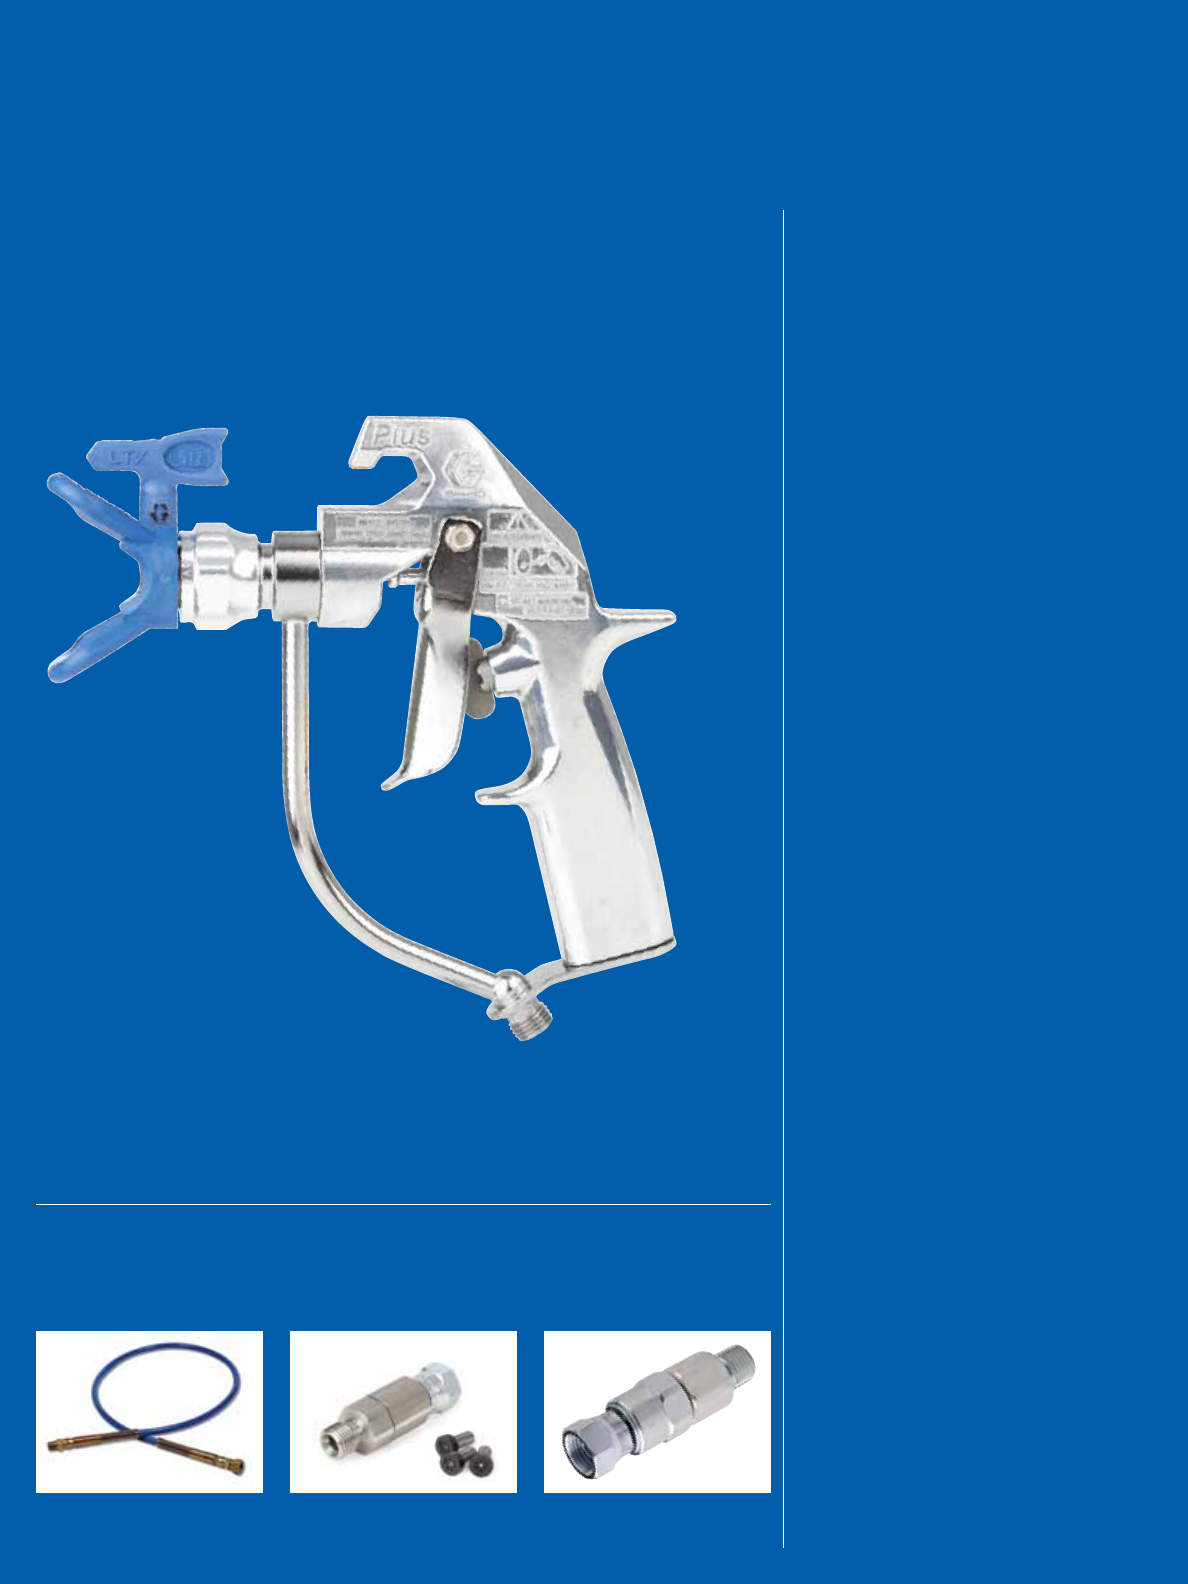 Airless Accessories 248157 300621H graco brochure